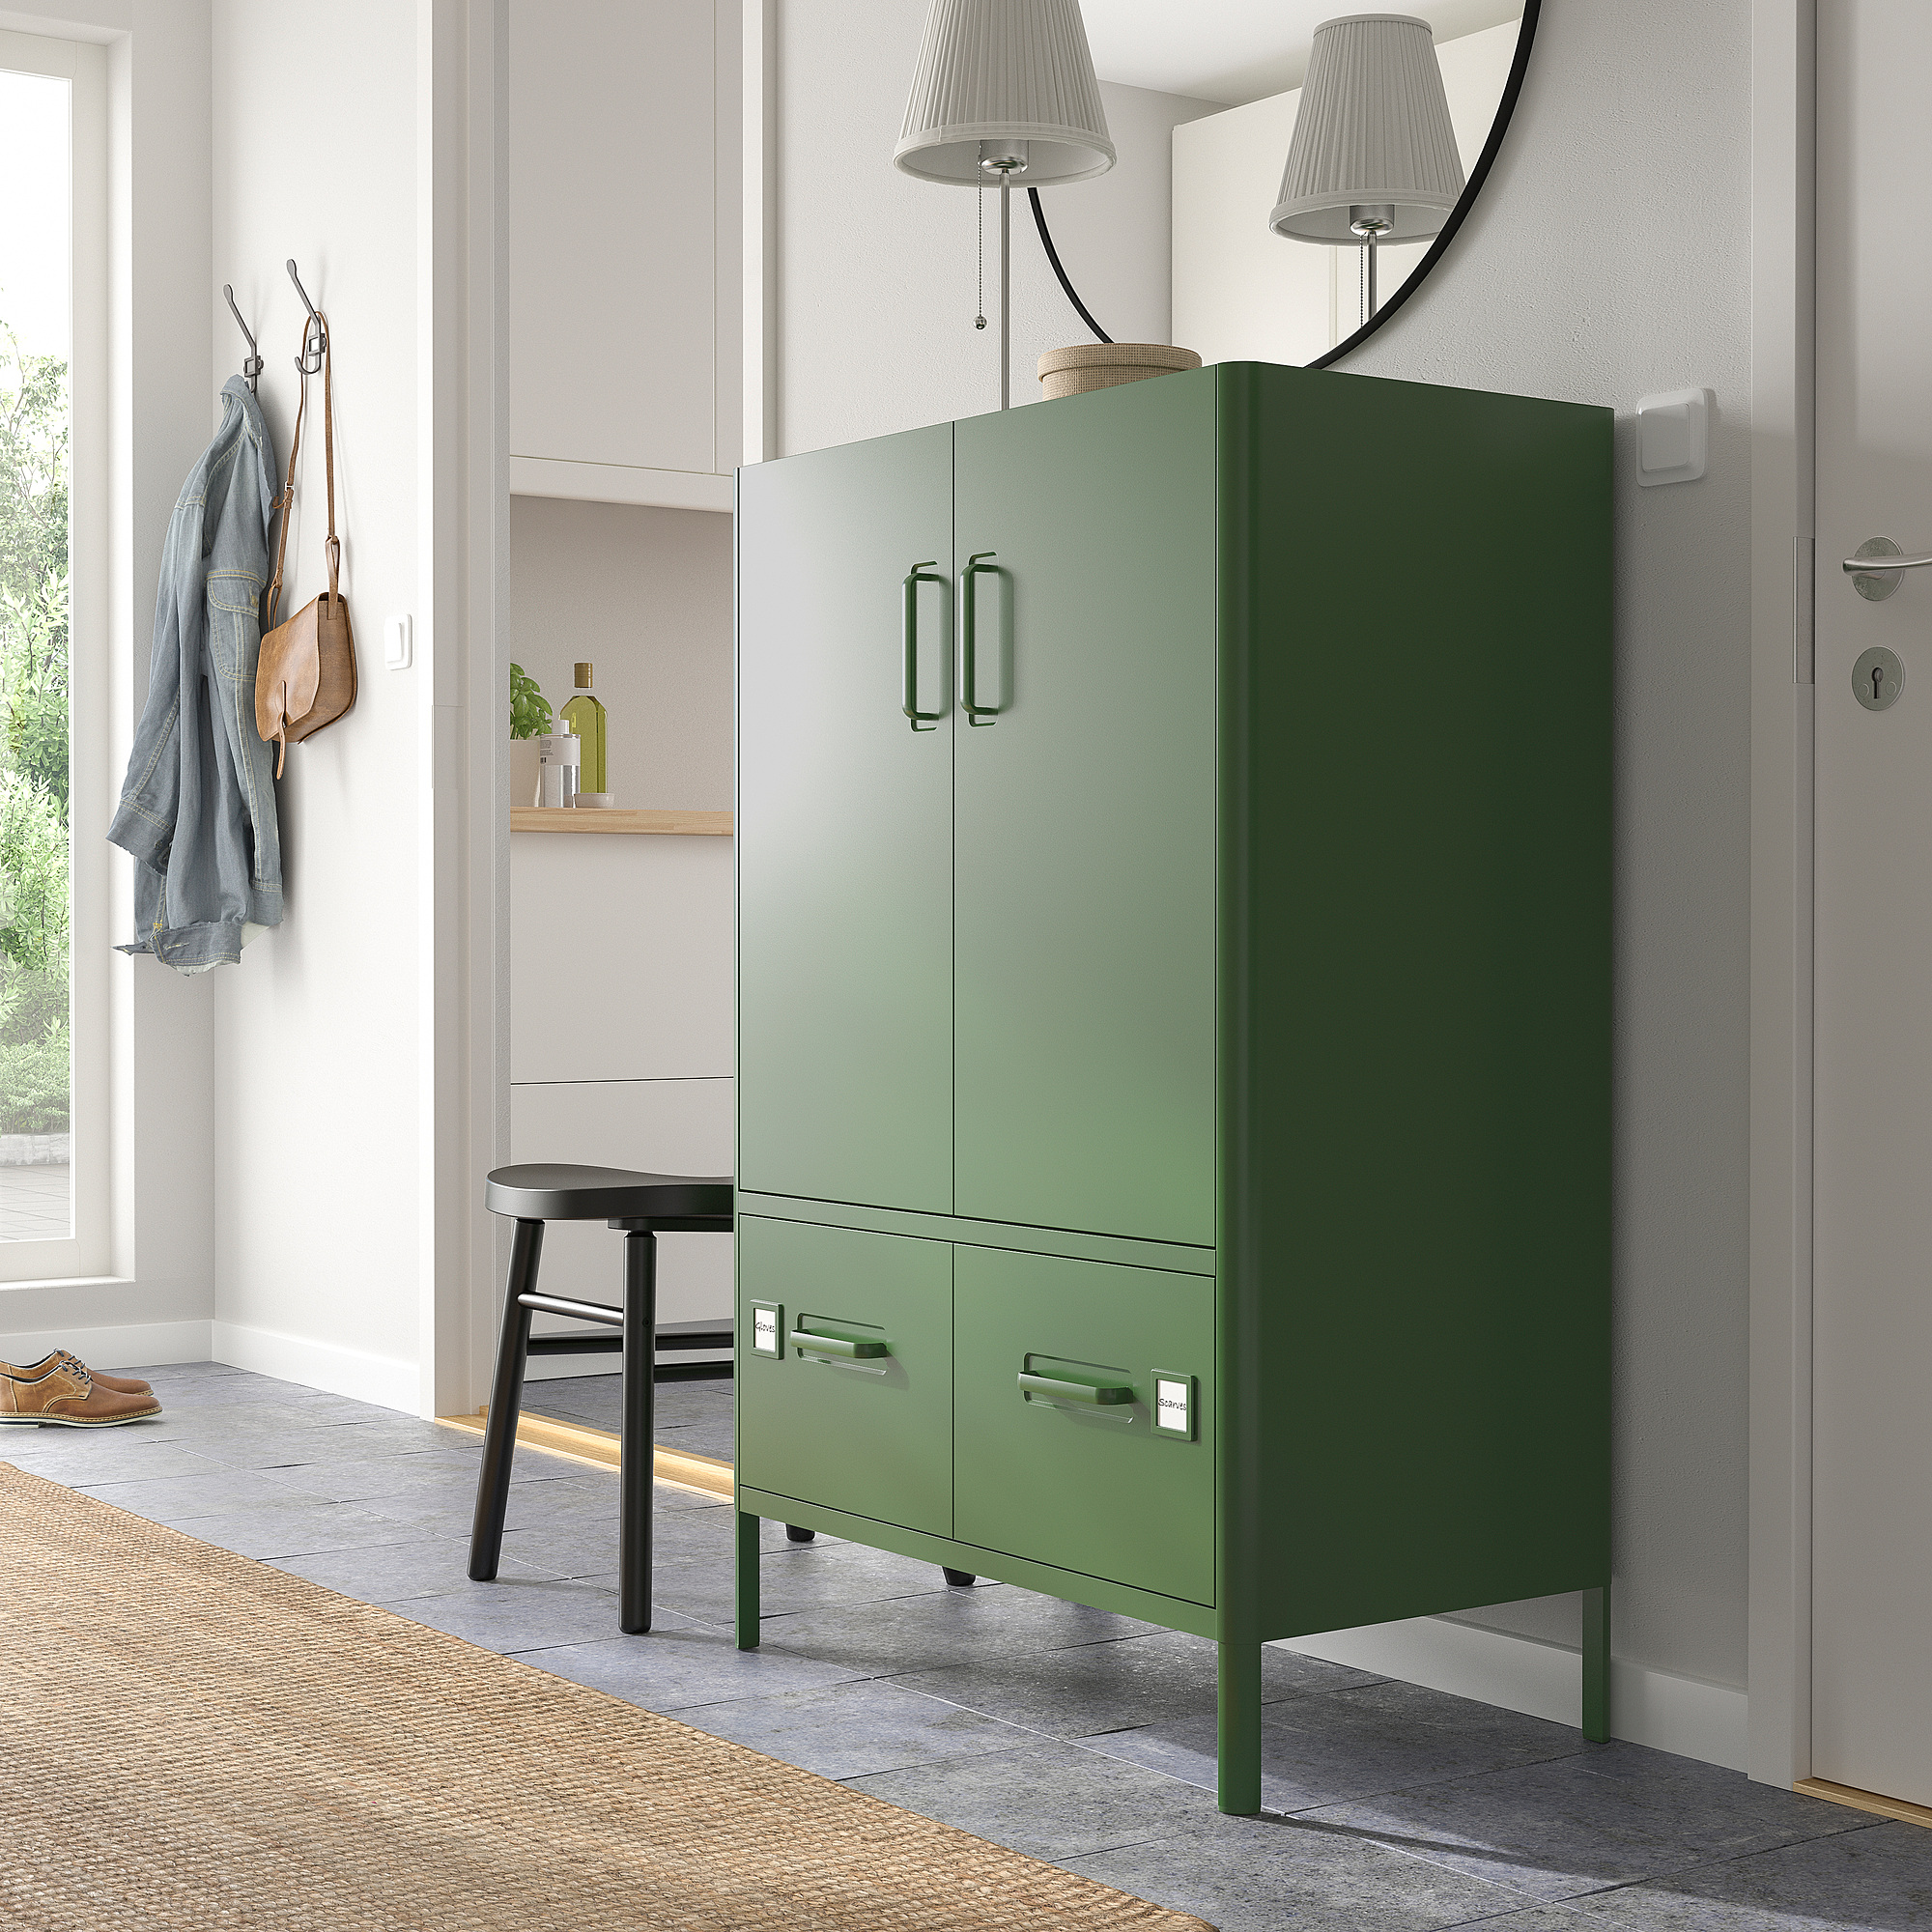 IDÅSEN cabinet with doors and drawers